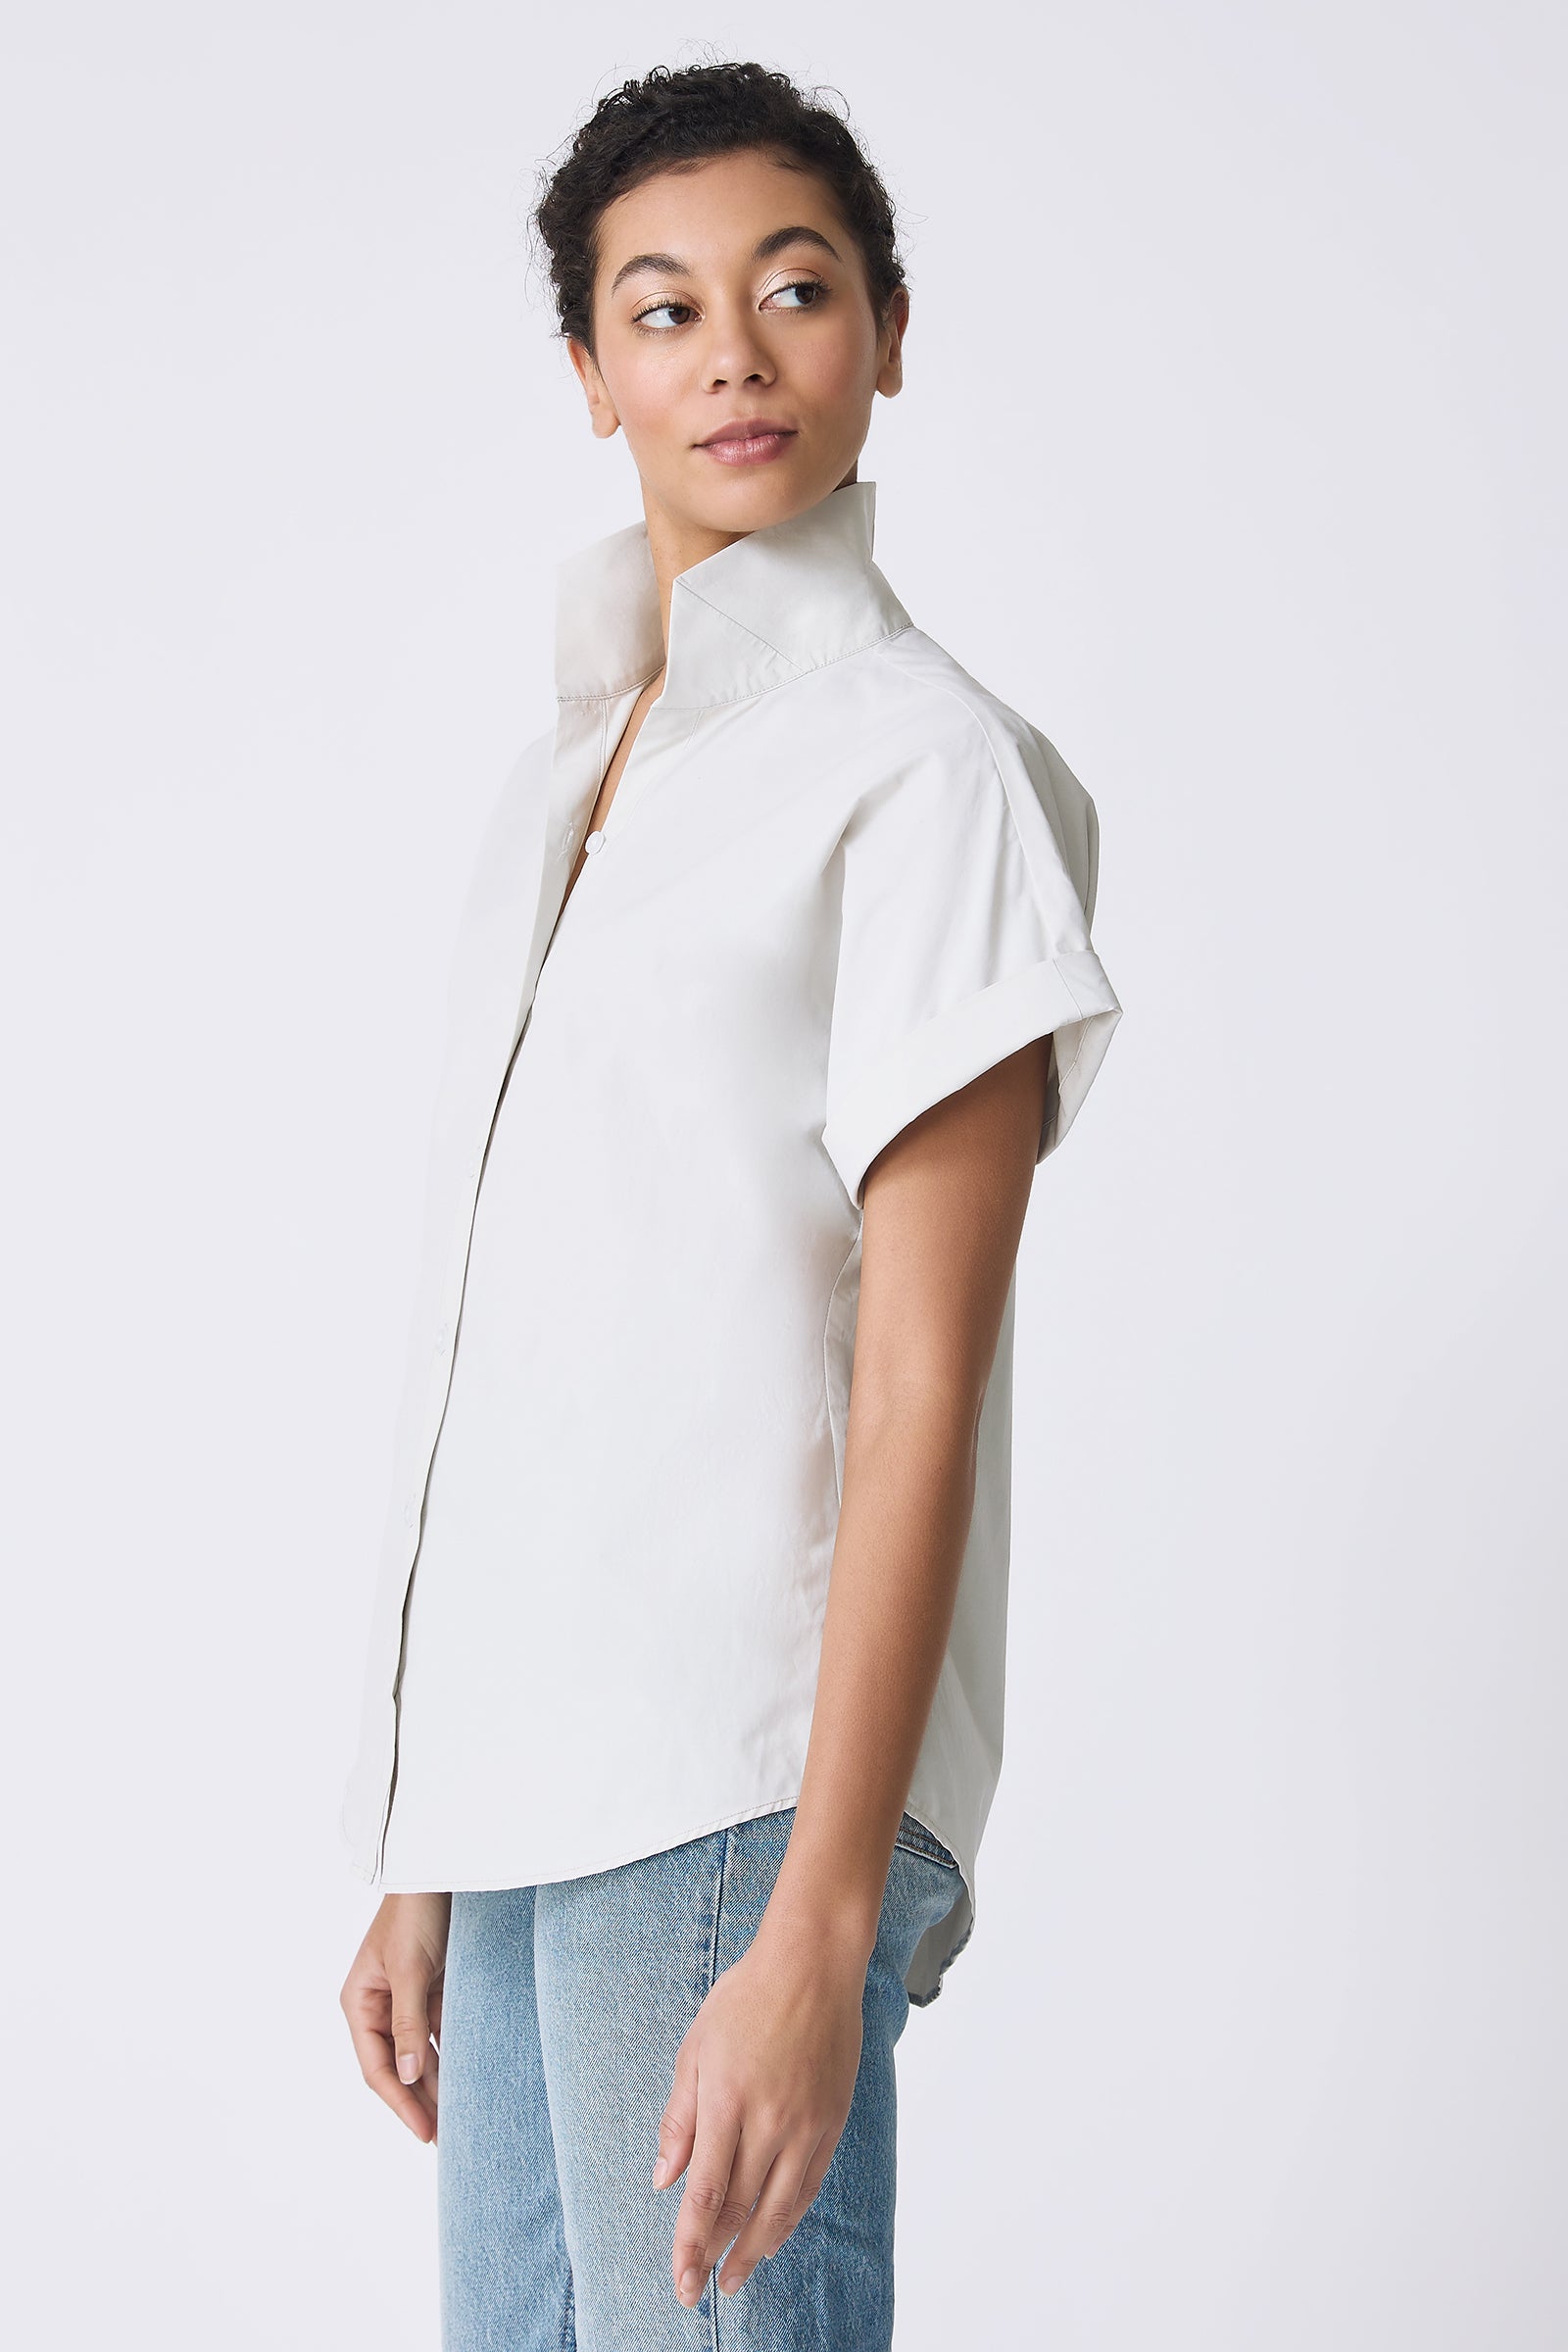 Kal Rieman Ali Kimono Top in Stone on model looking over shoulder side view